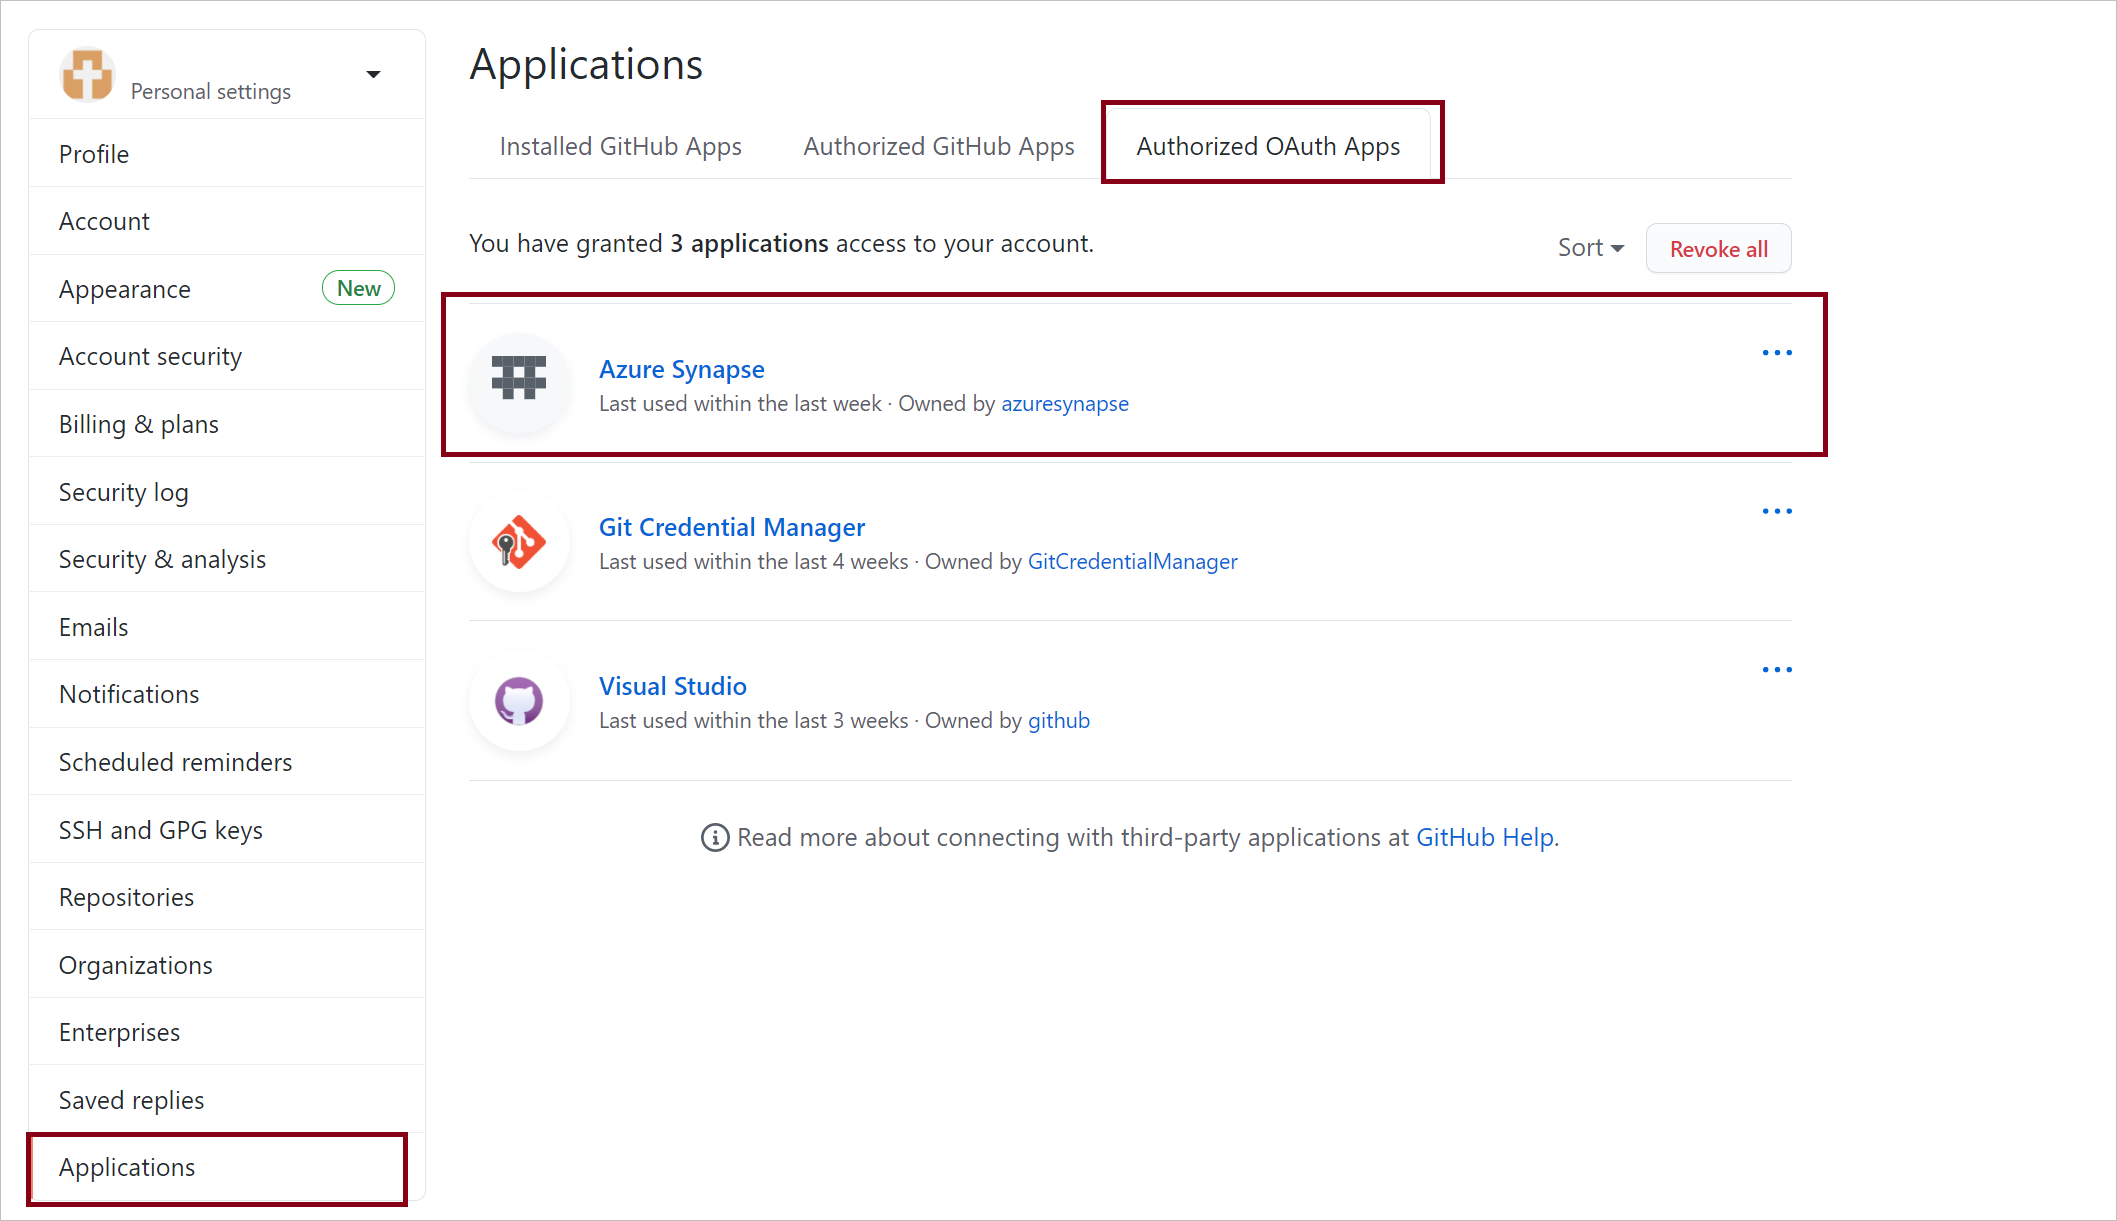 Authorize OAuth Apps